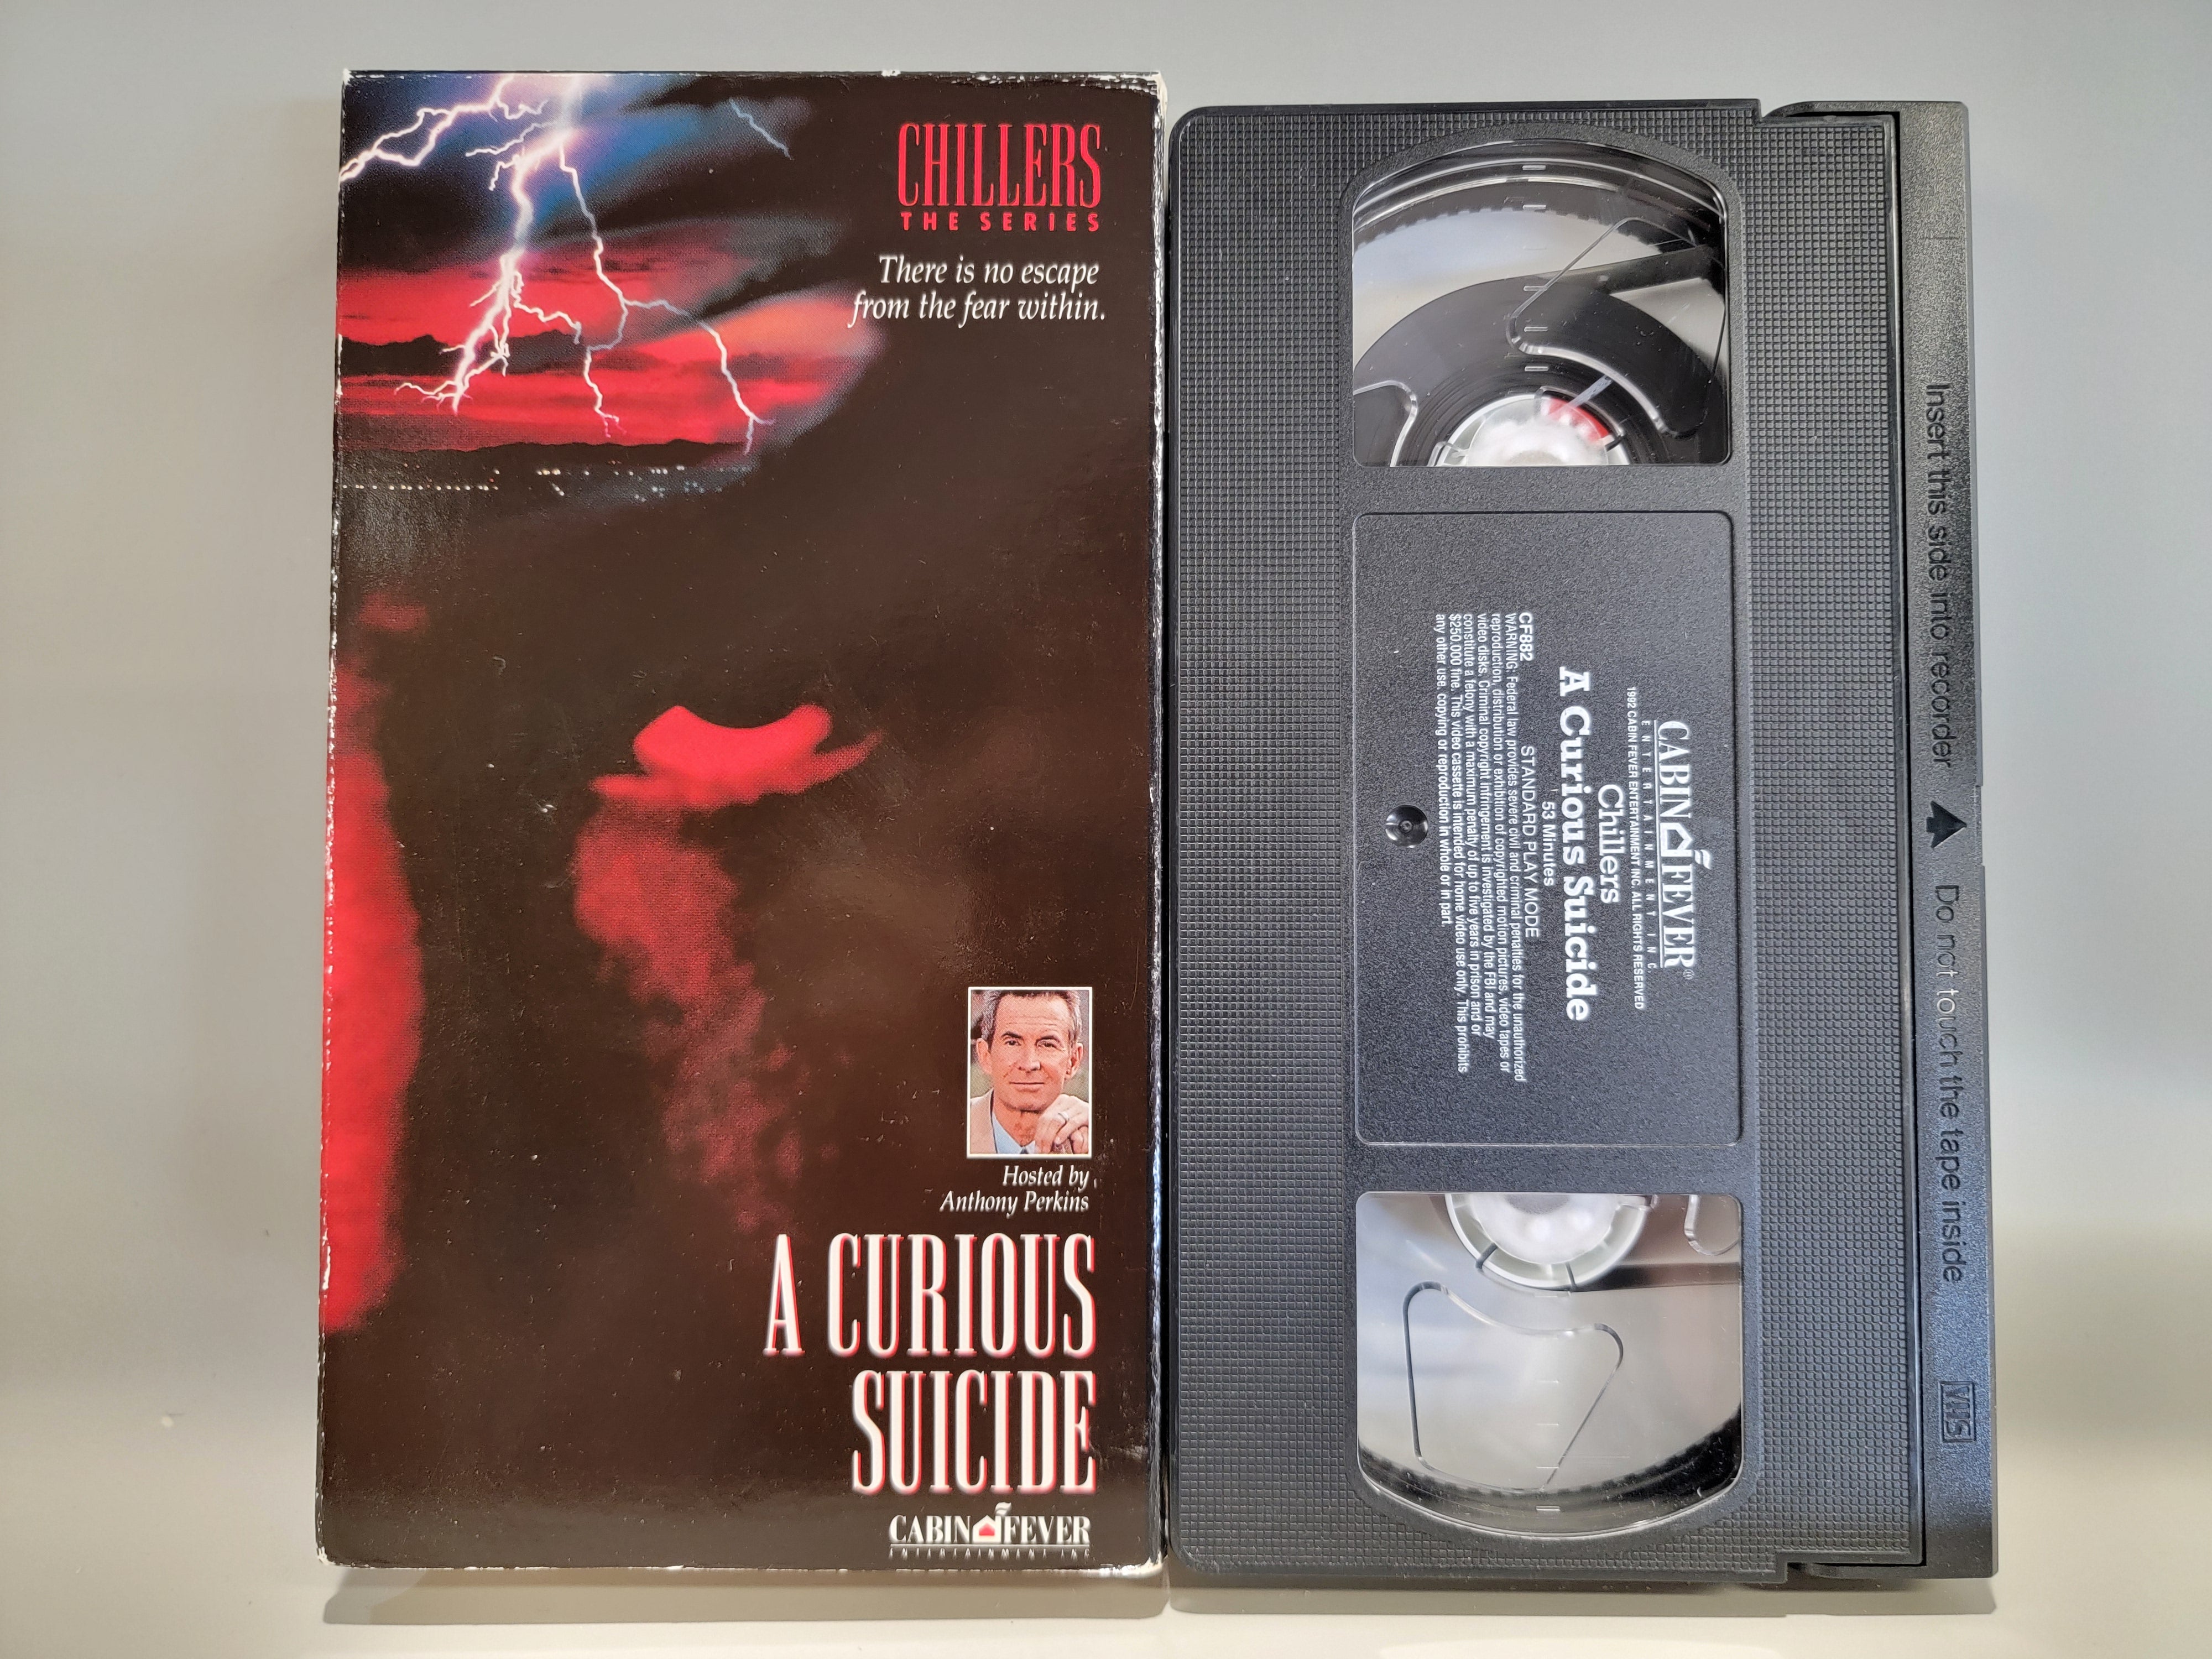 CHILLERS THE SERIES: A CURIOUS SUICIDE VHS [USED]